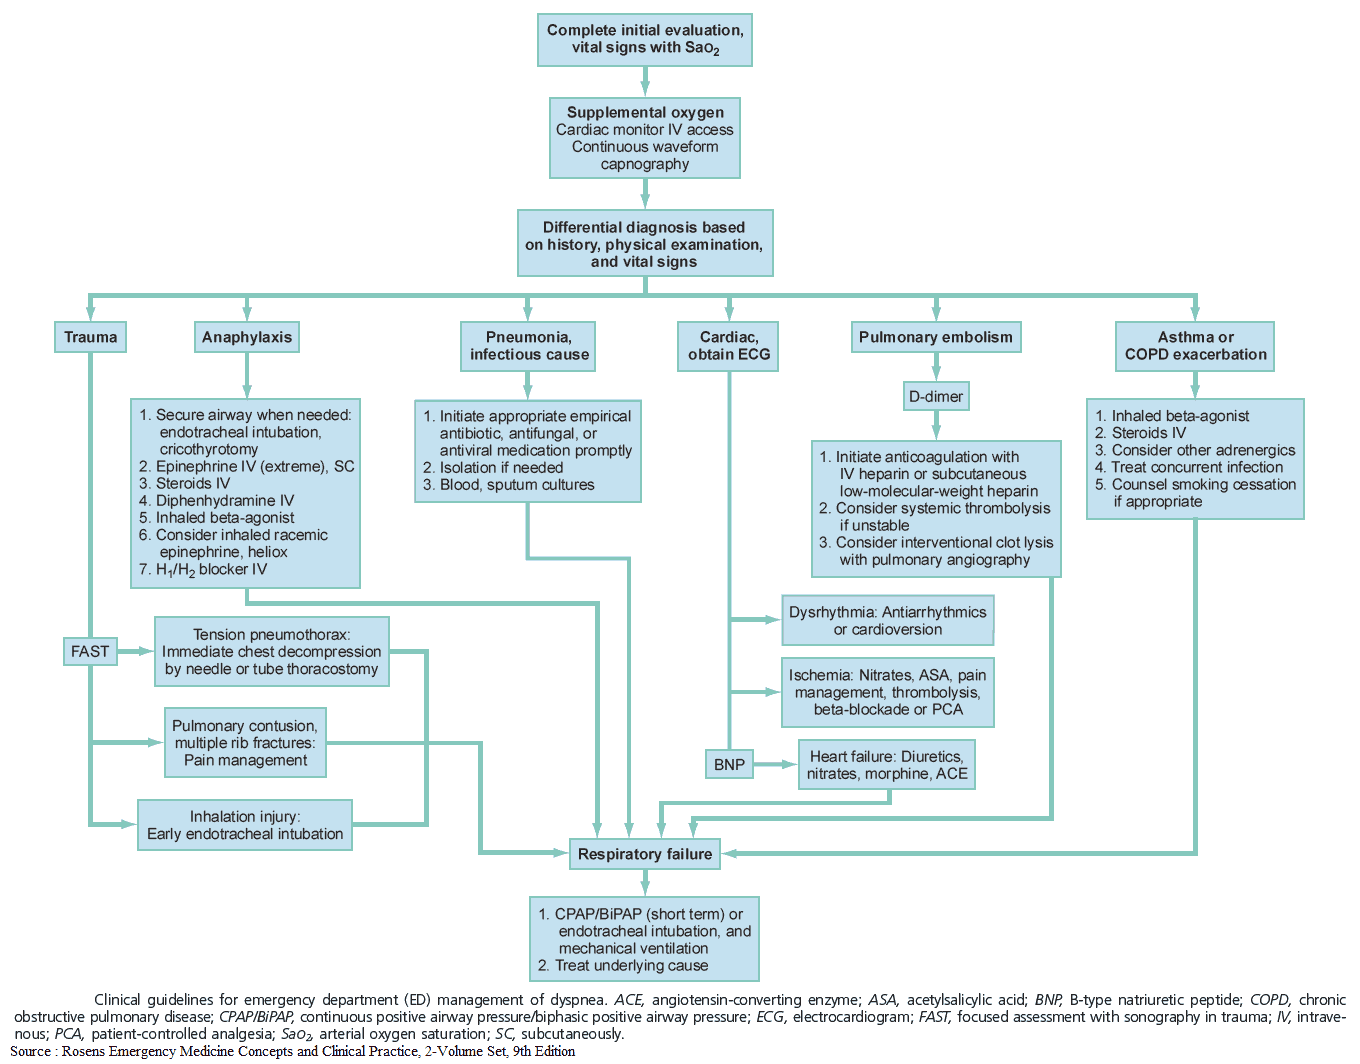 Clinical guidelines for emergency department (ED) management of dyspnea